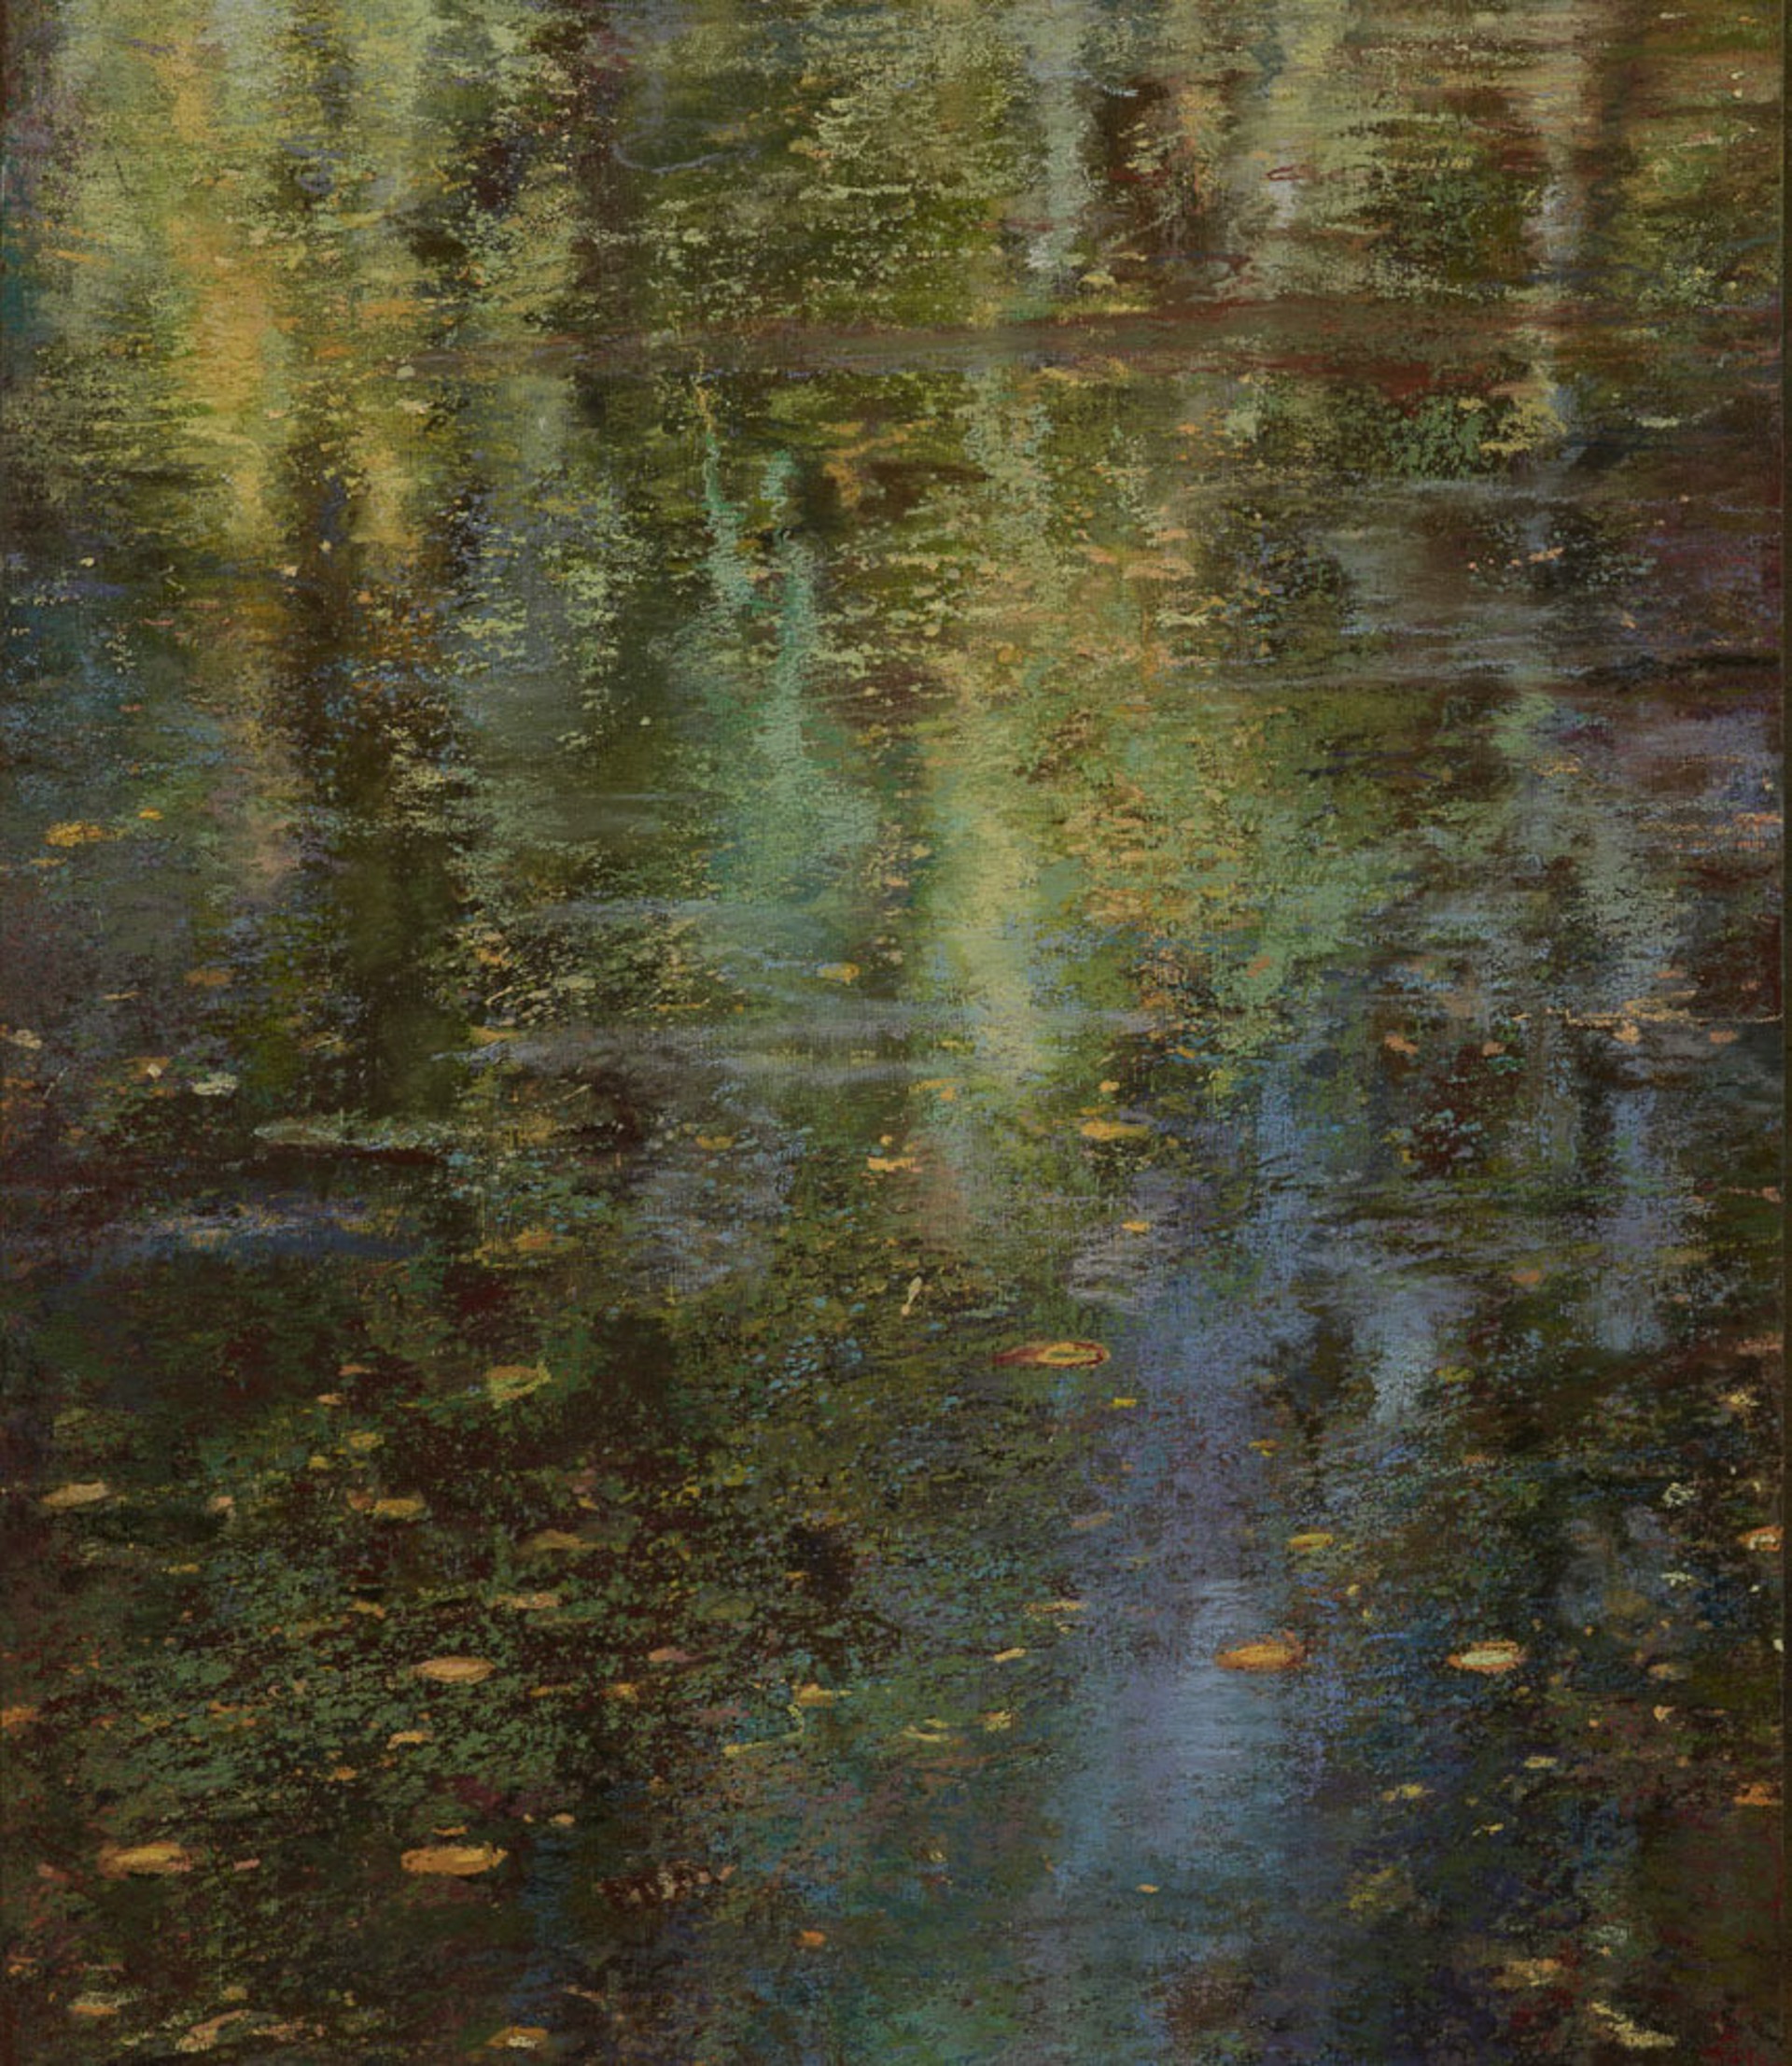 Green Pond by Gail Chase Bien